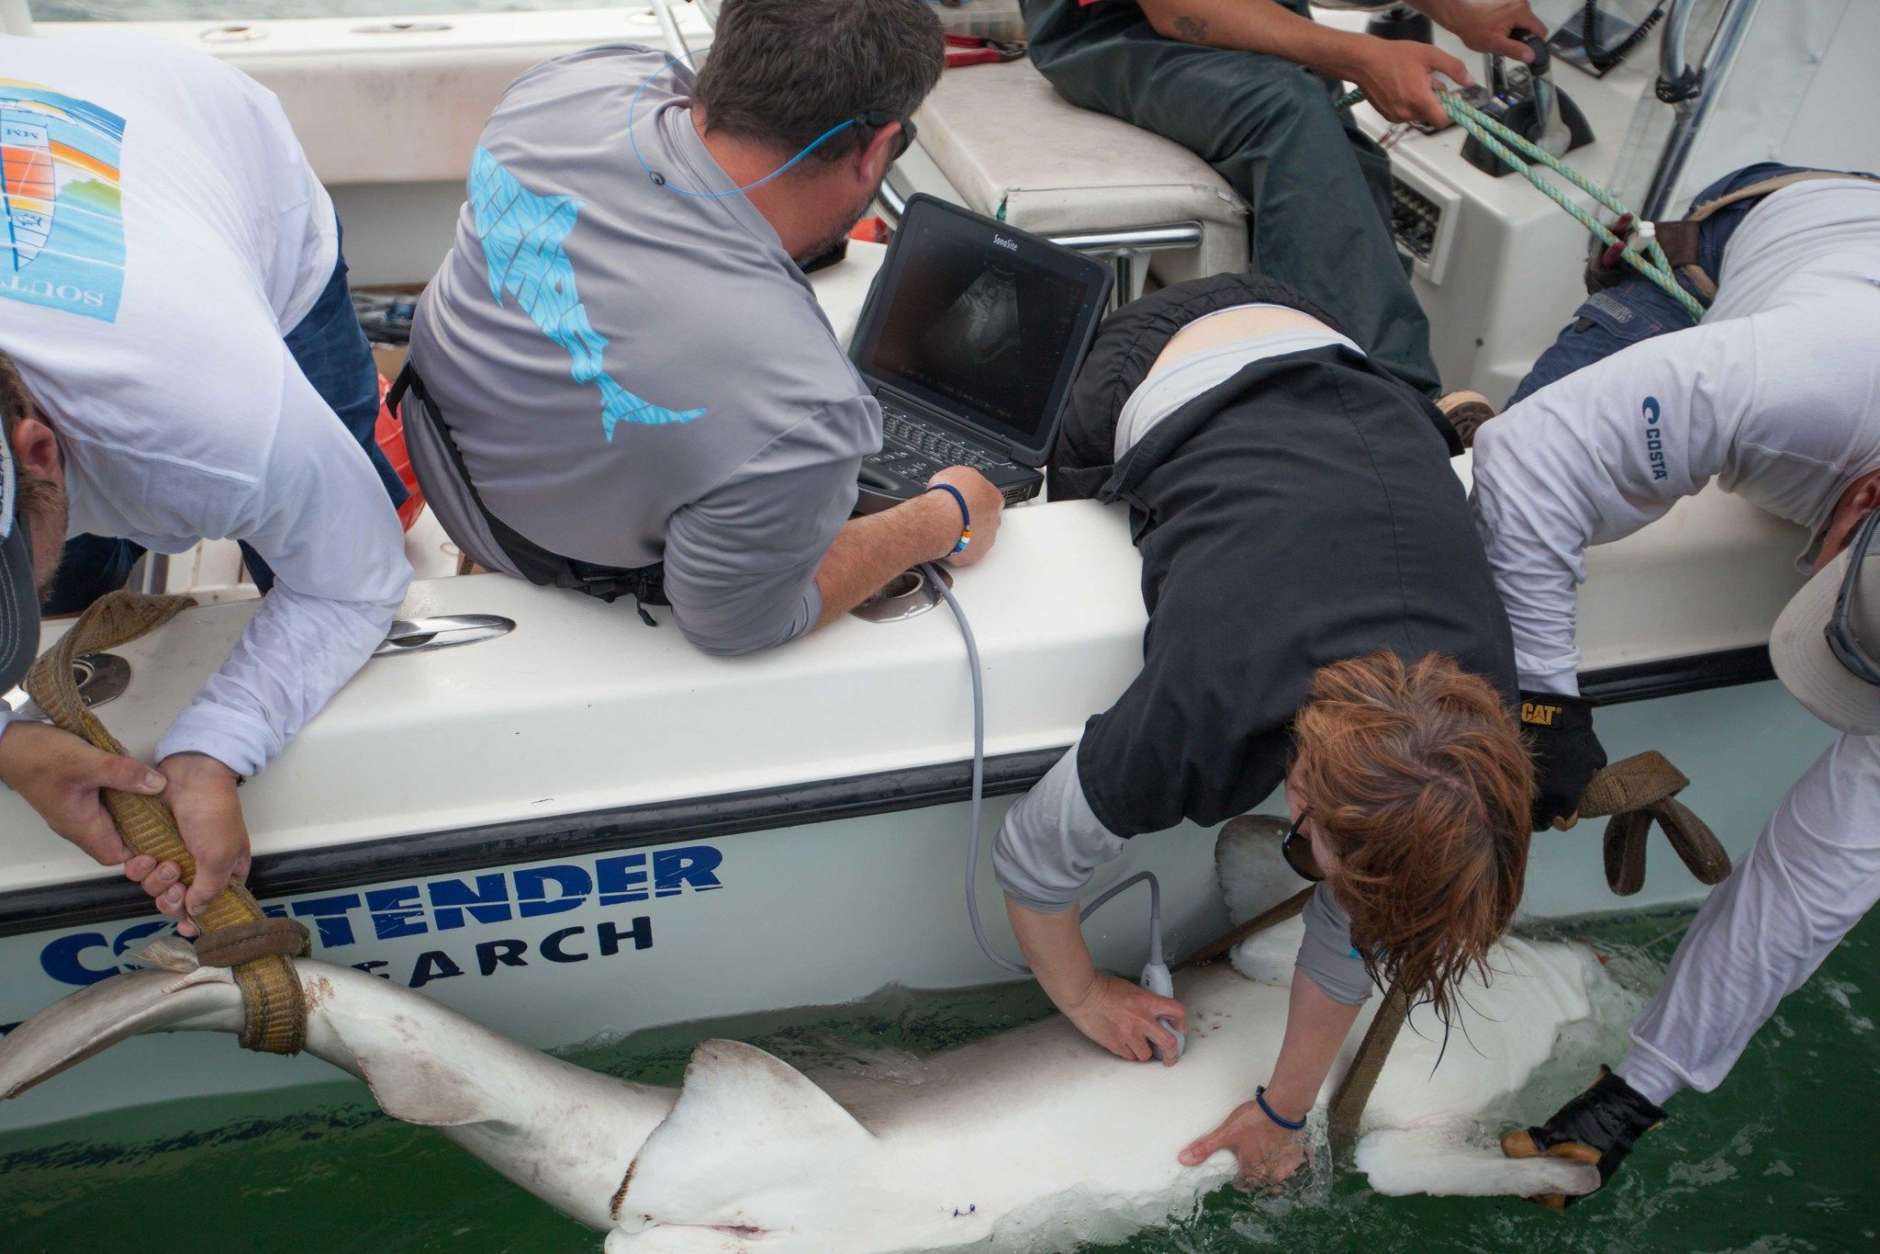 An OCEARCH crew caught, tagged and took blood samples from some tiger sand sharks during its recent mid-Atlantic expedition. (Courtesy OCEARCH)